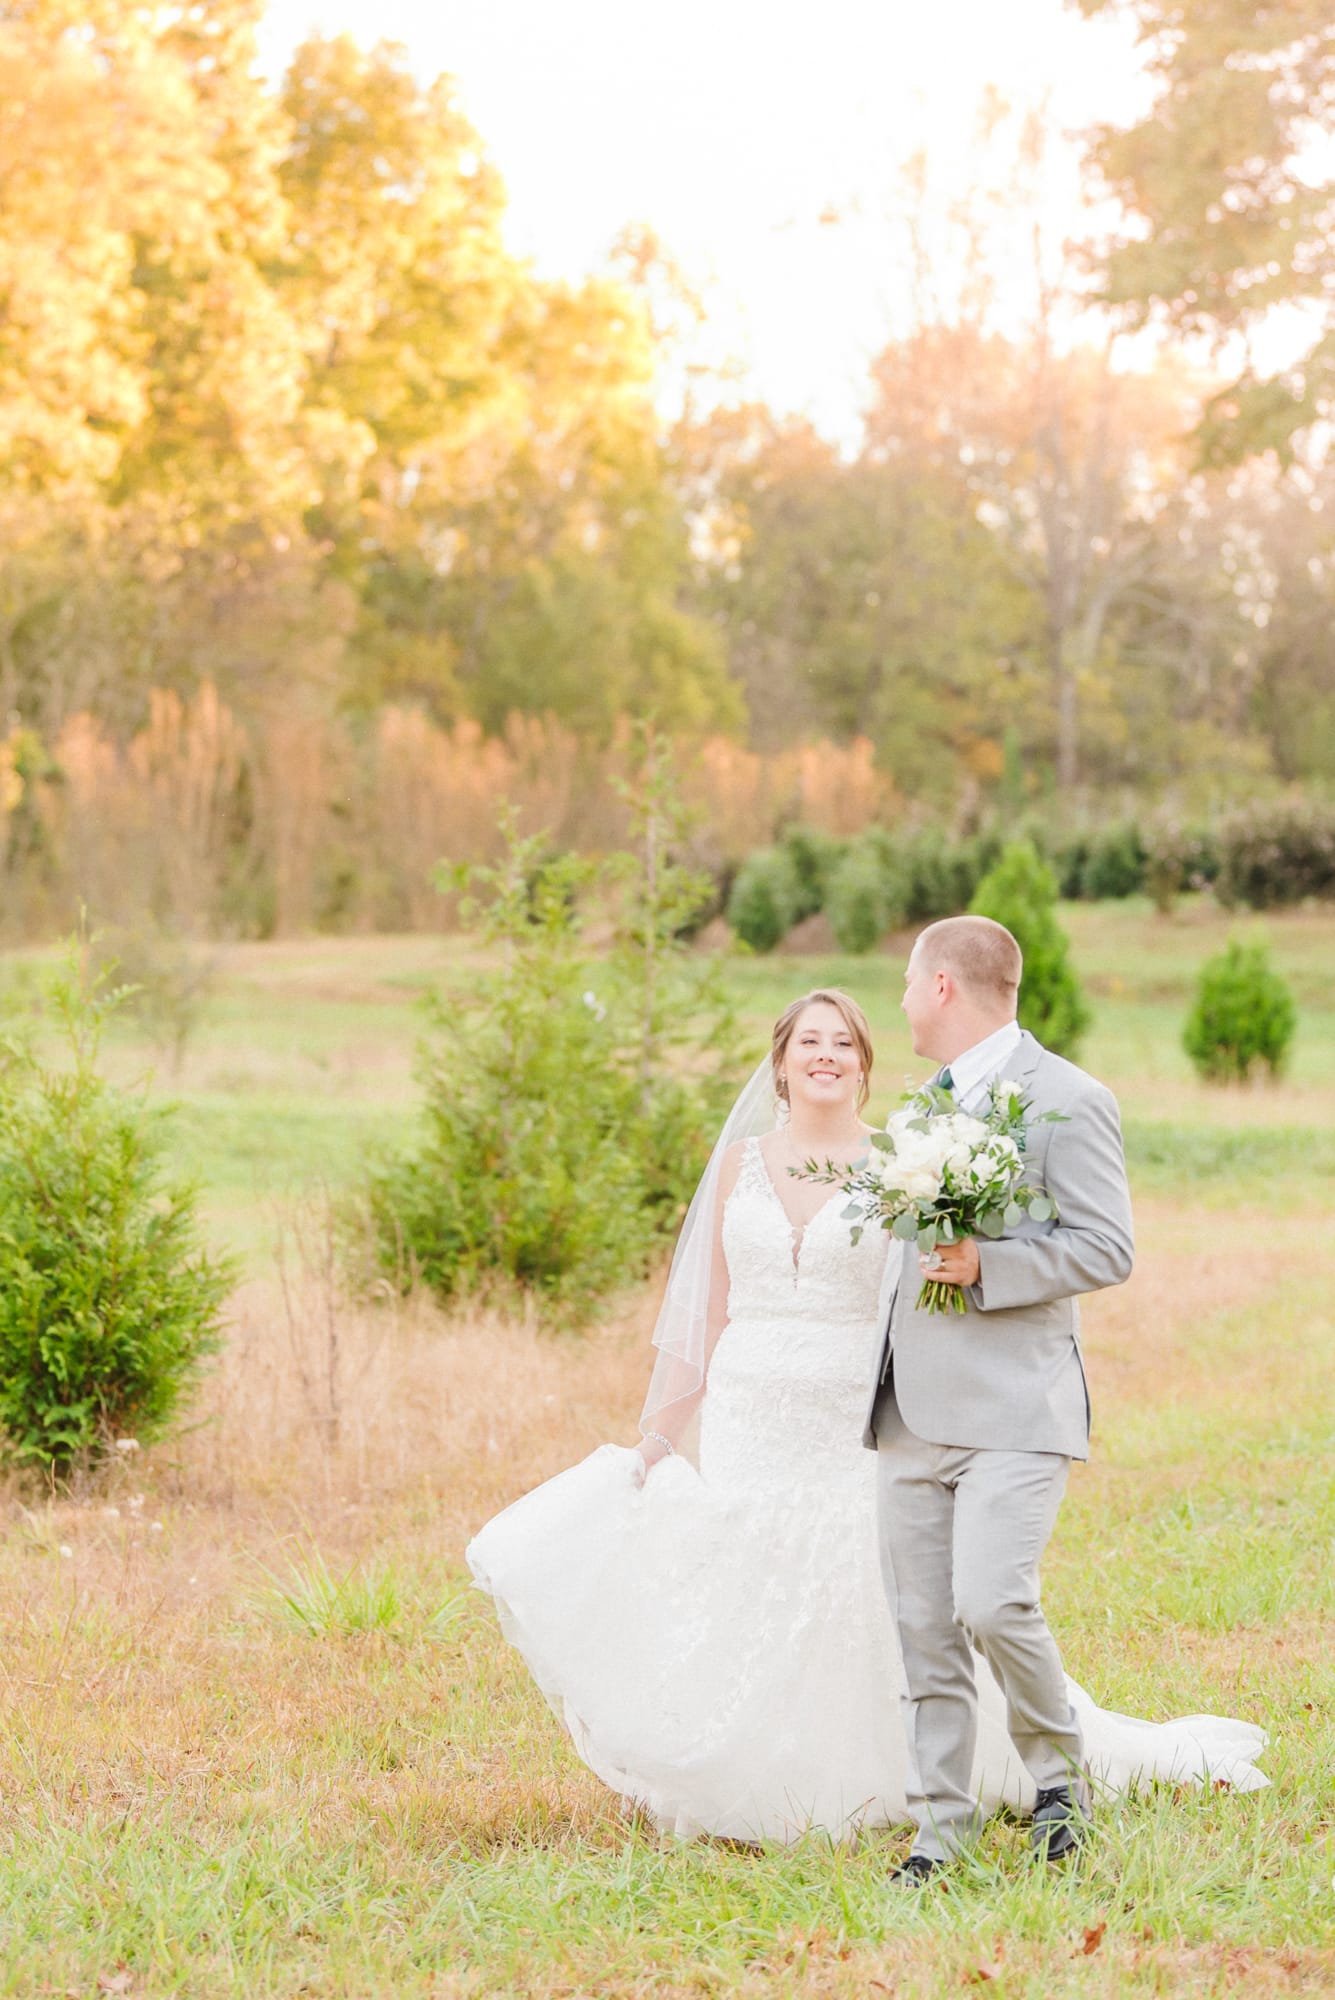 Katelynn and Alec walk through the field at Low Meadows Estate, hand in hand.